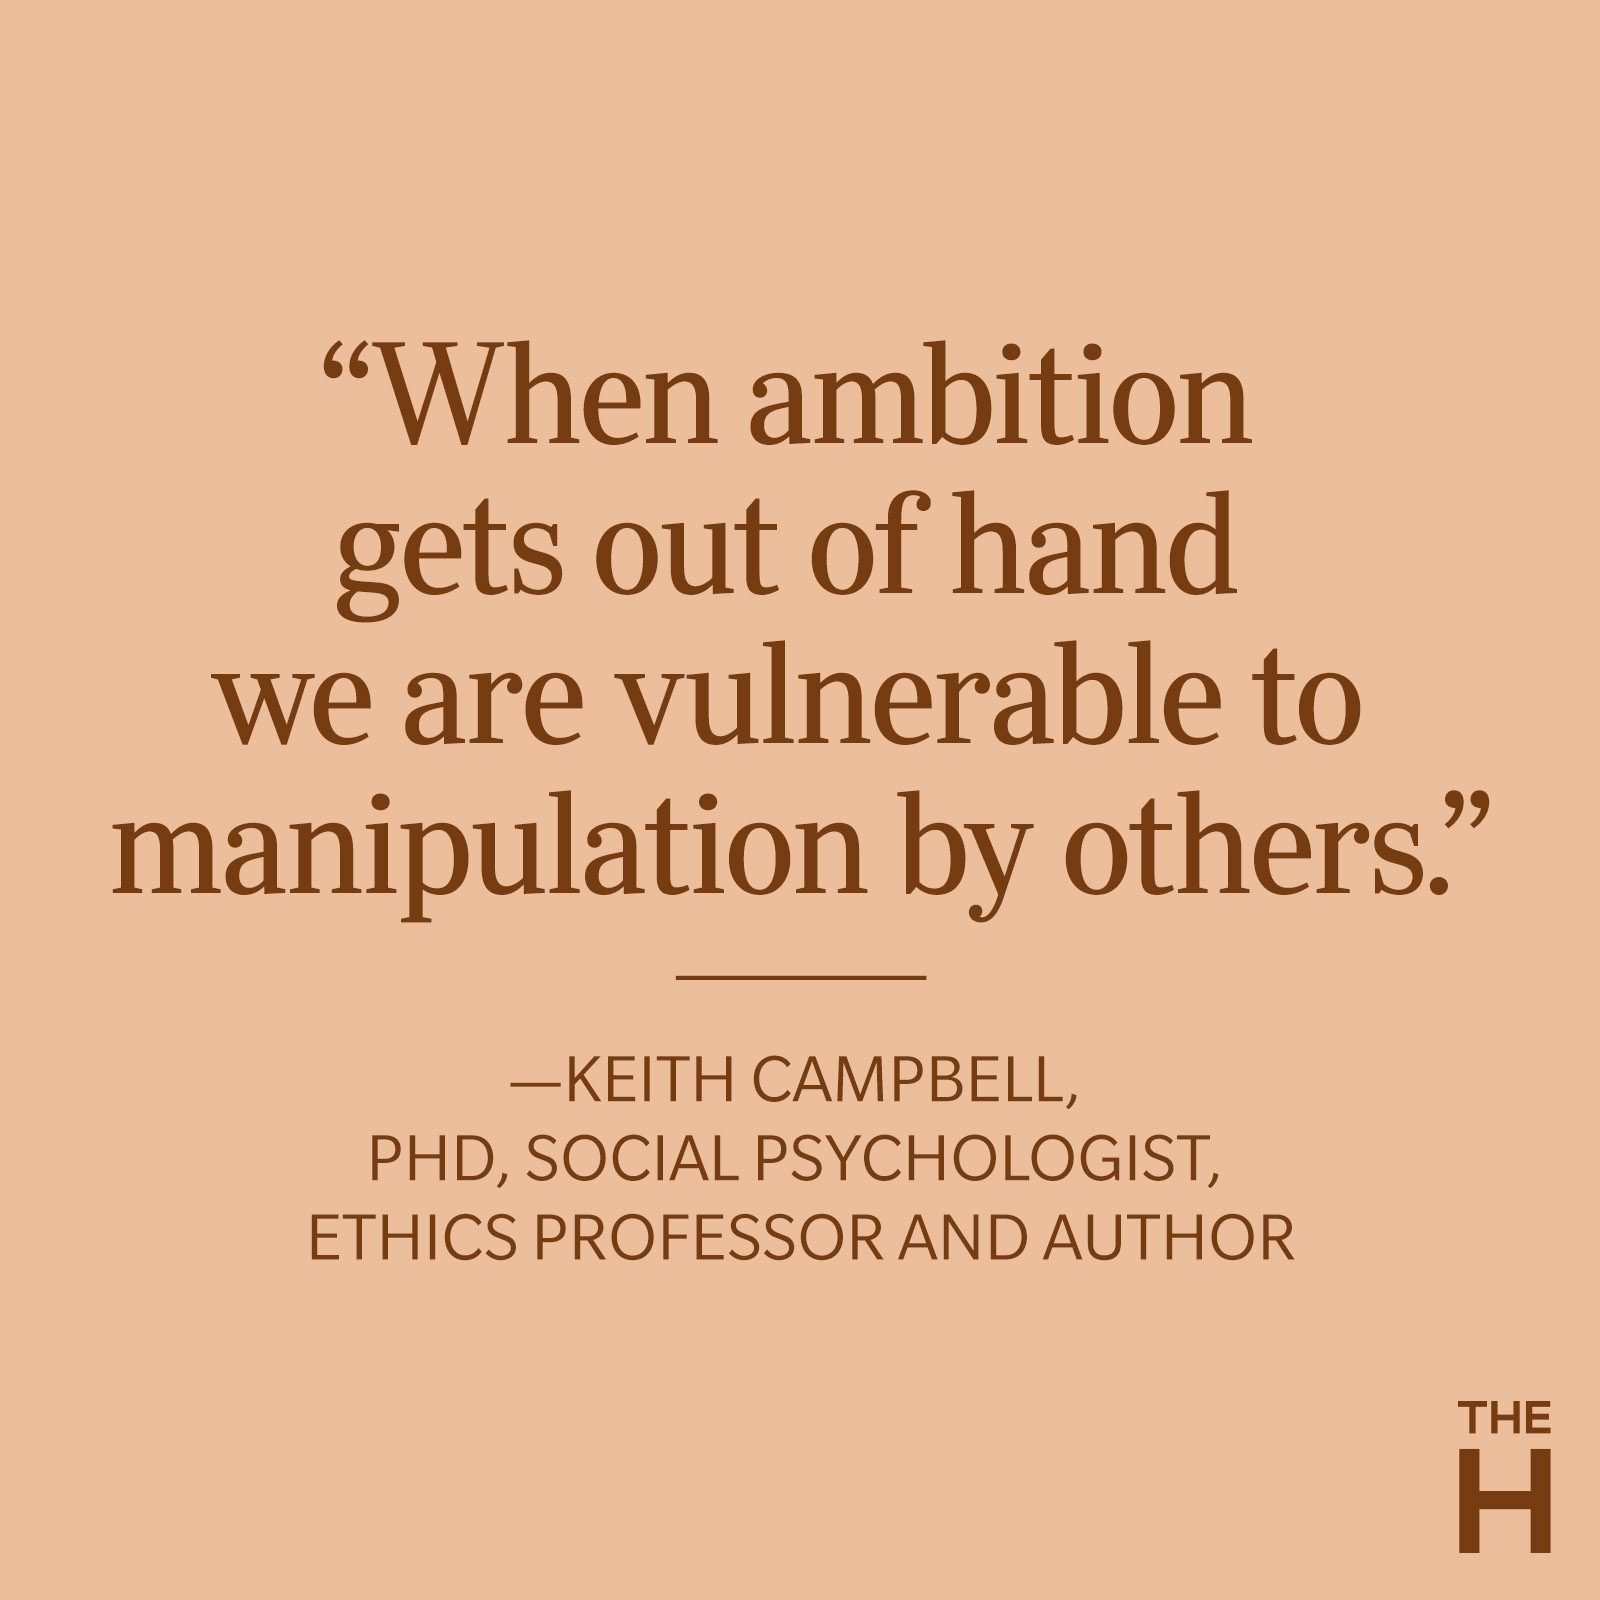 16 Manipulation Quotes From Experts to Help You Avoid Being Controlled